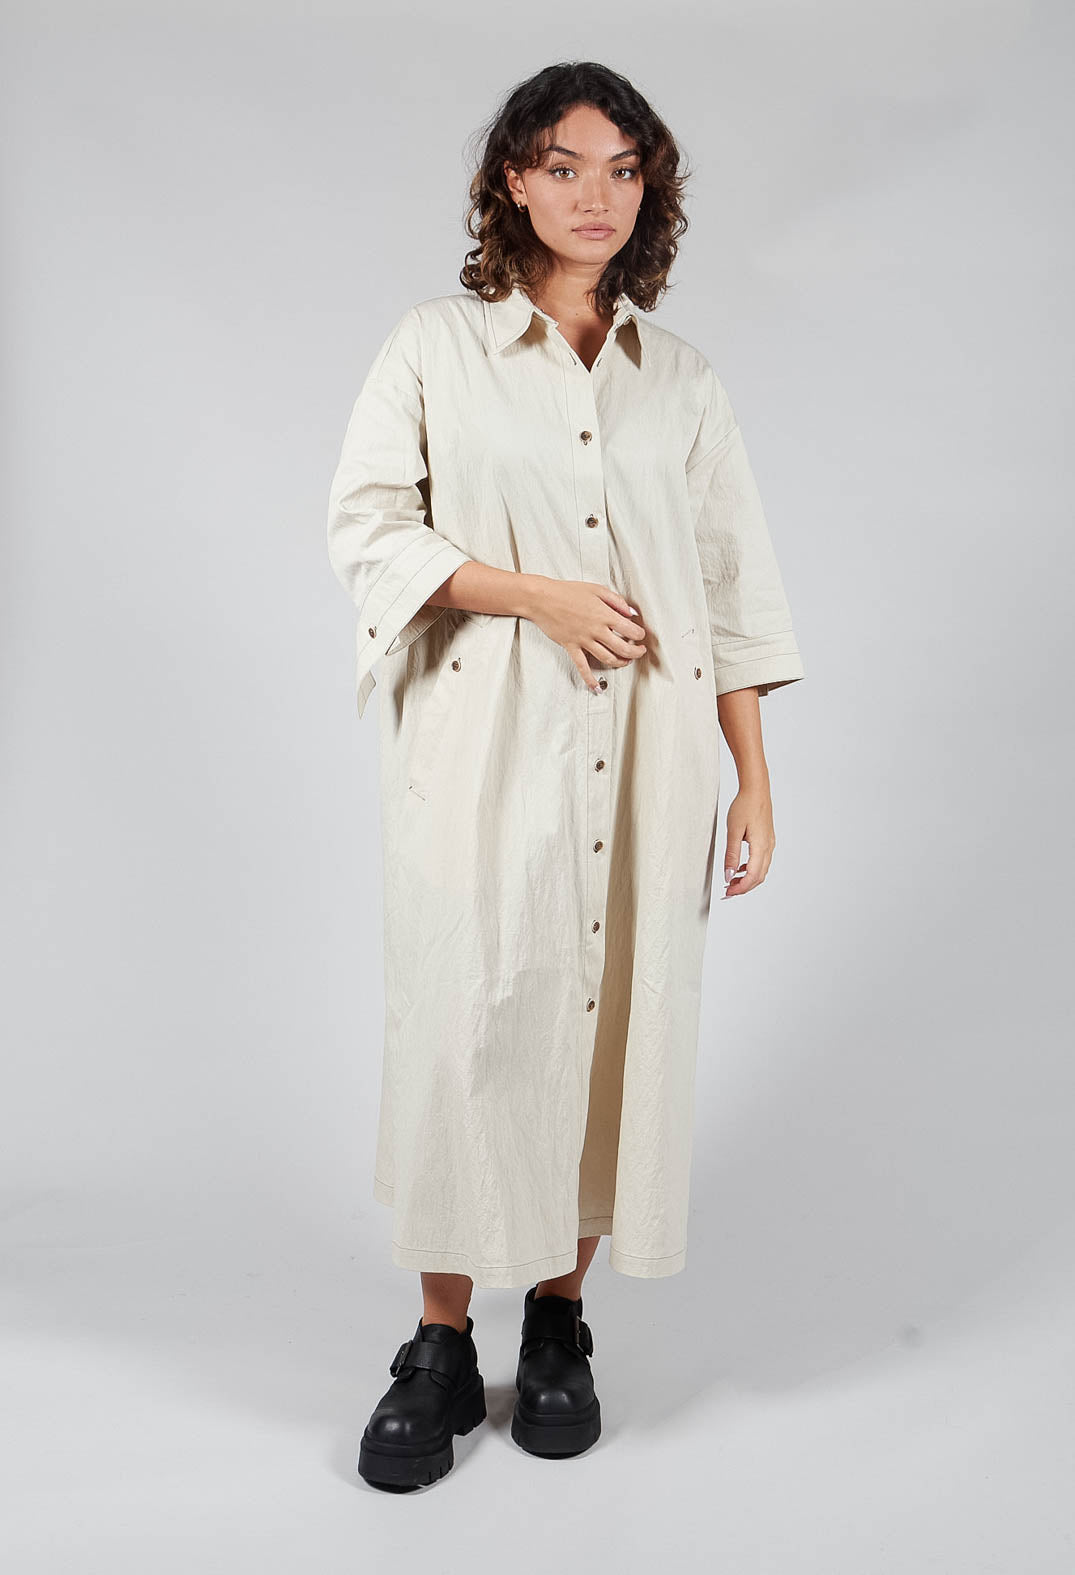 3/4 Sleeved Blouse Dress in Ivory